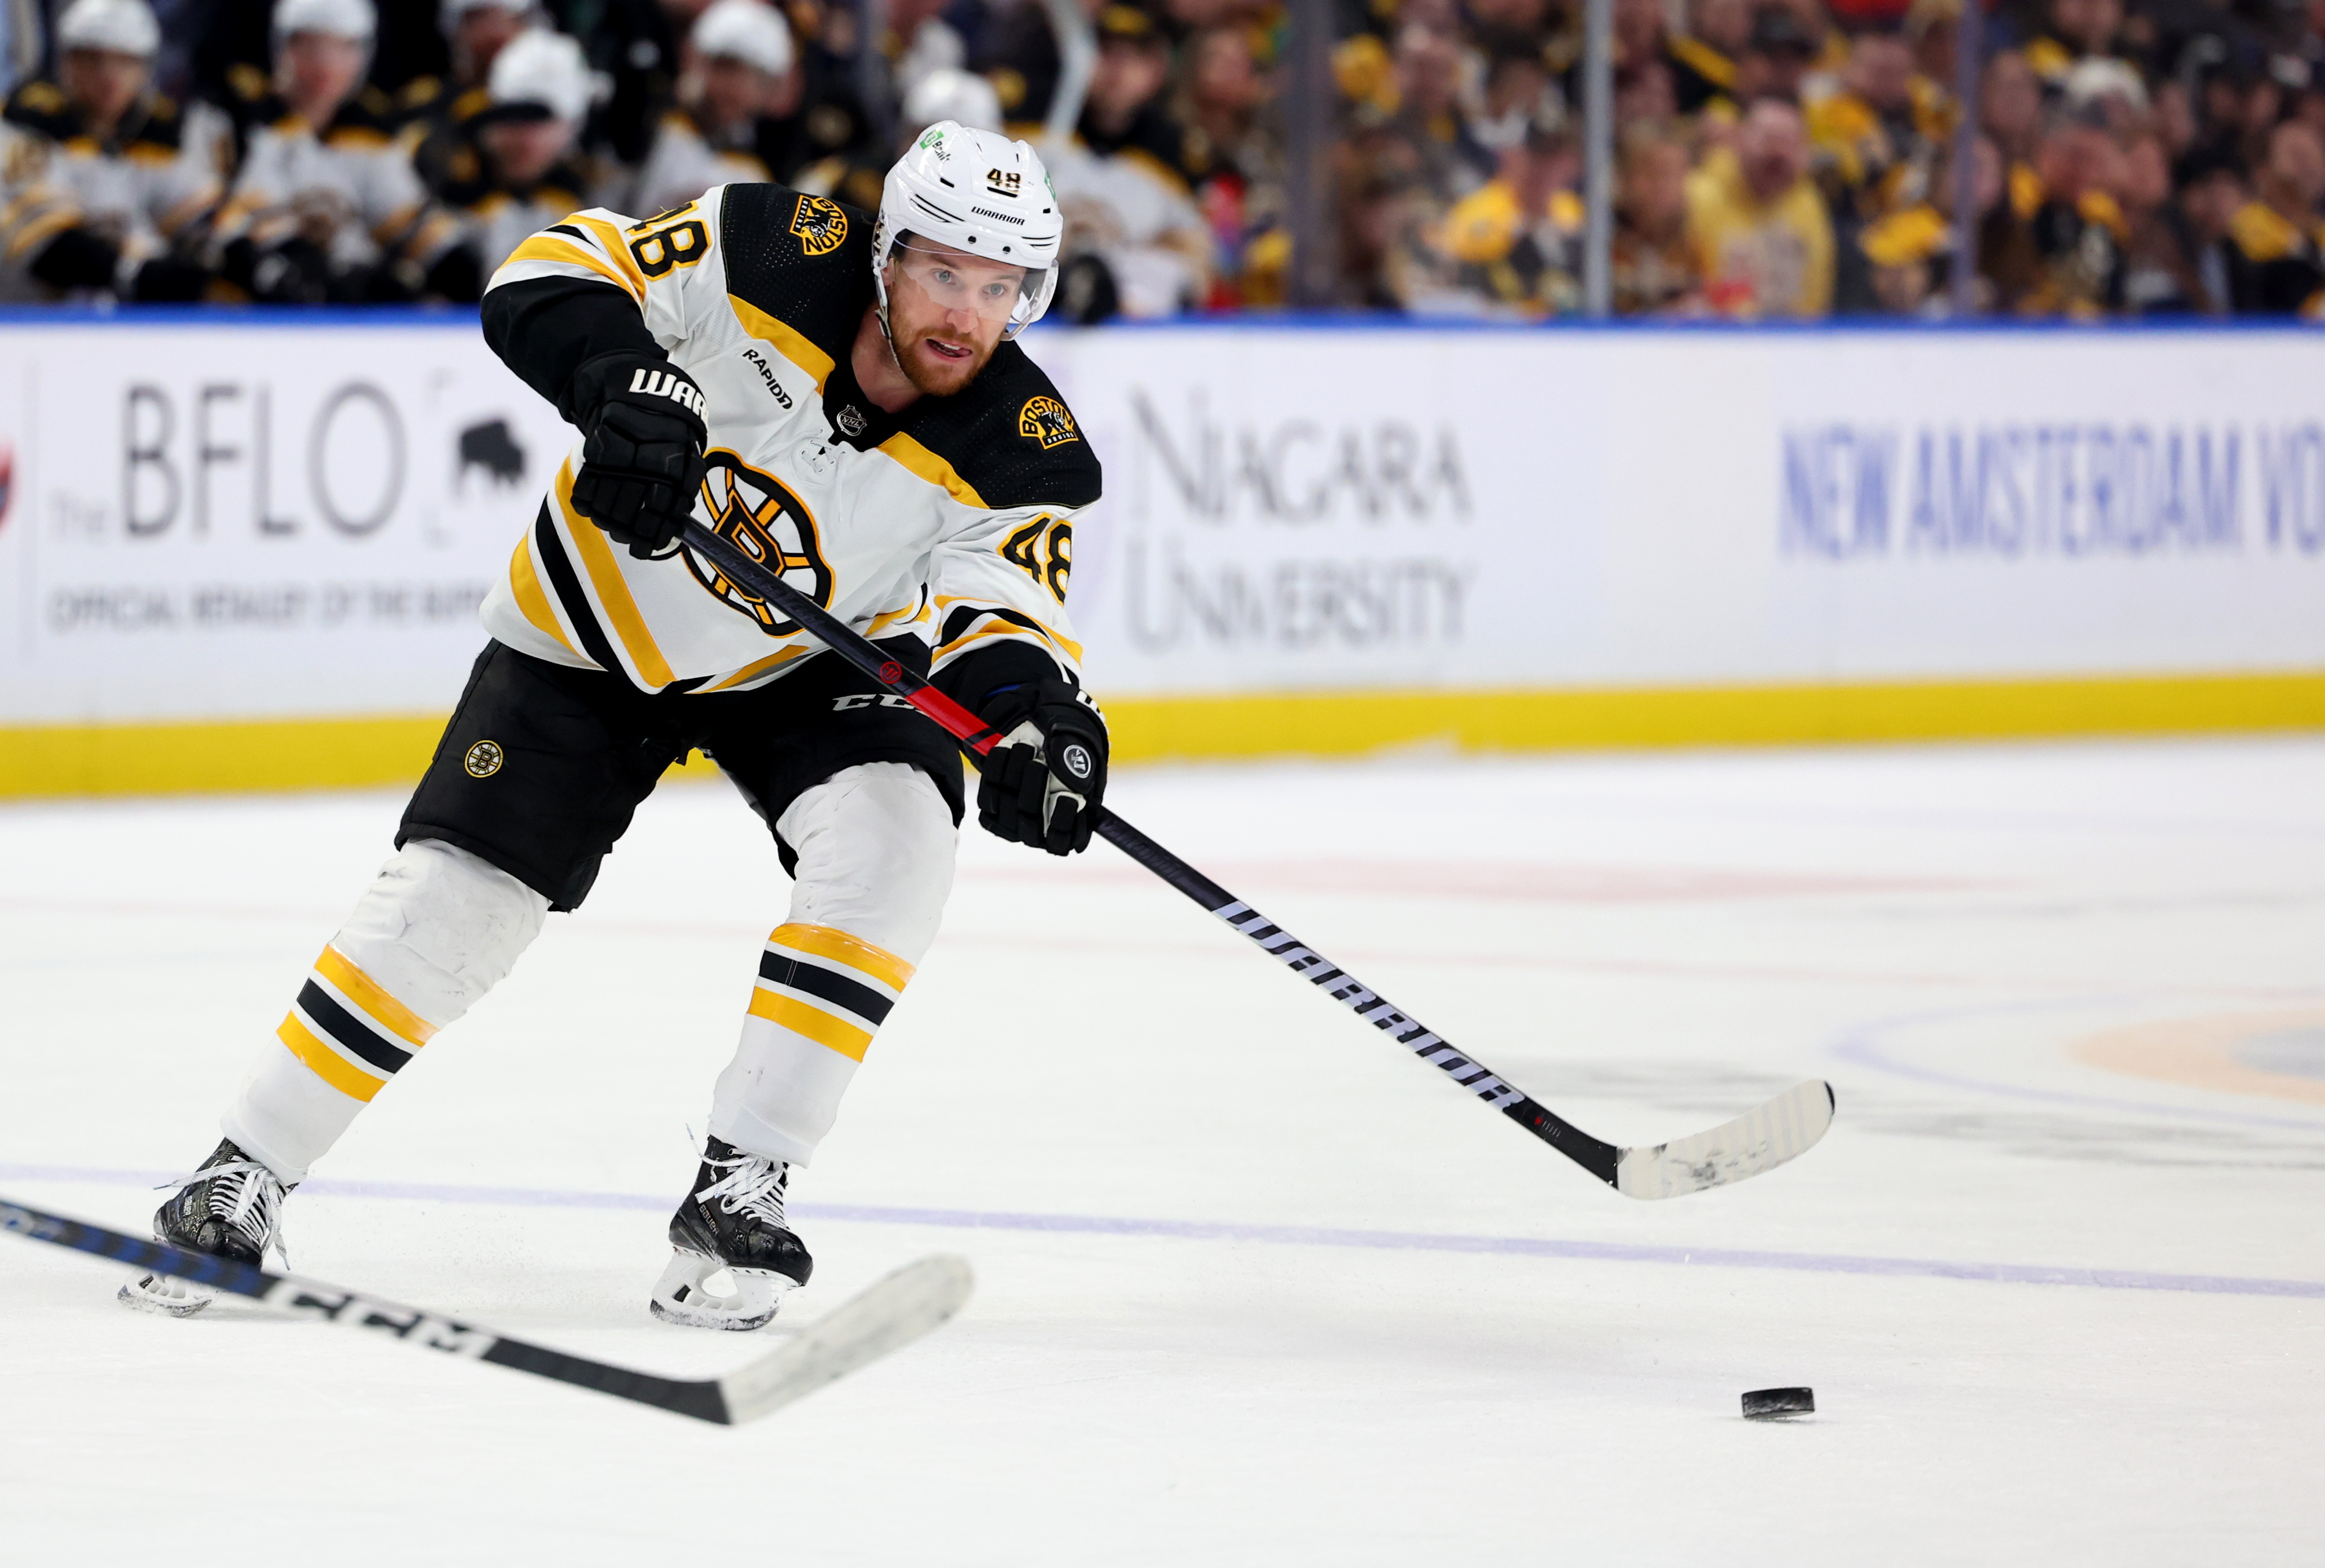 What Does The A.J. Greer Signing Mean For The Bruins?